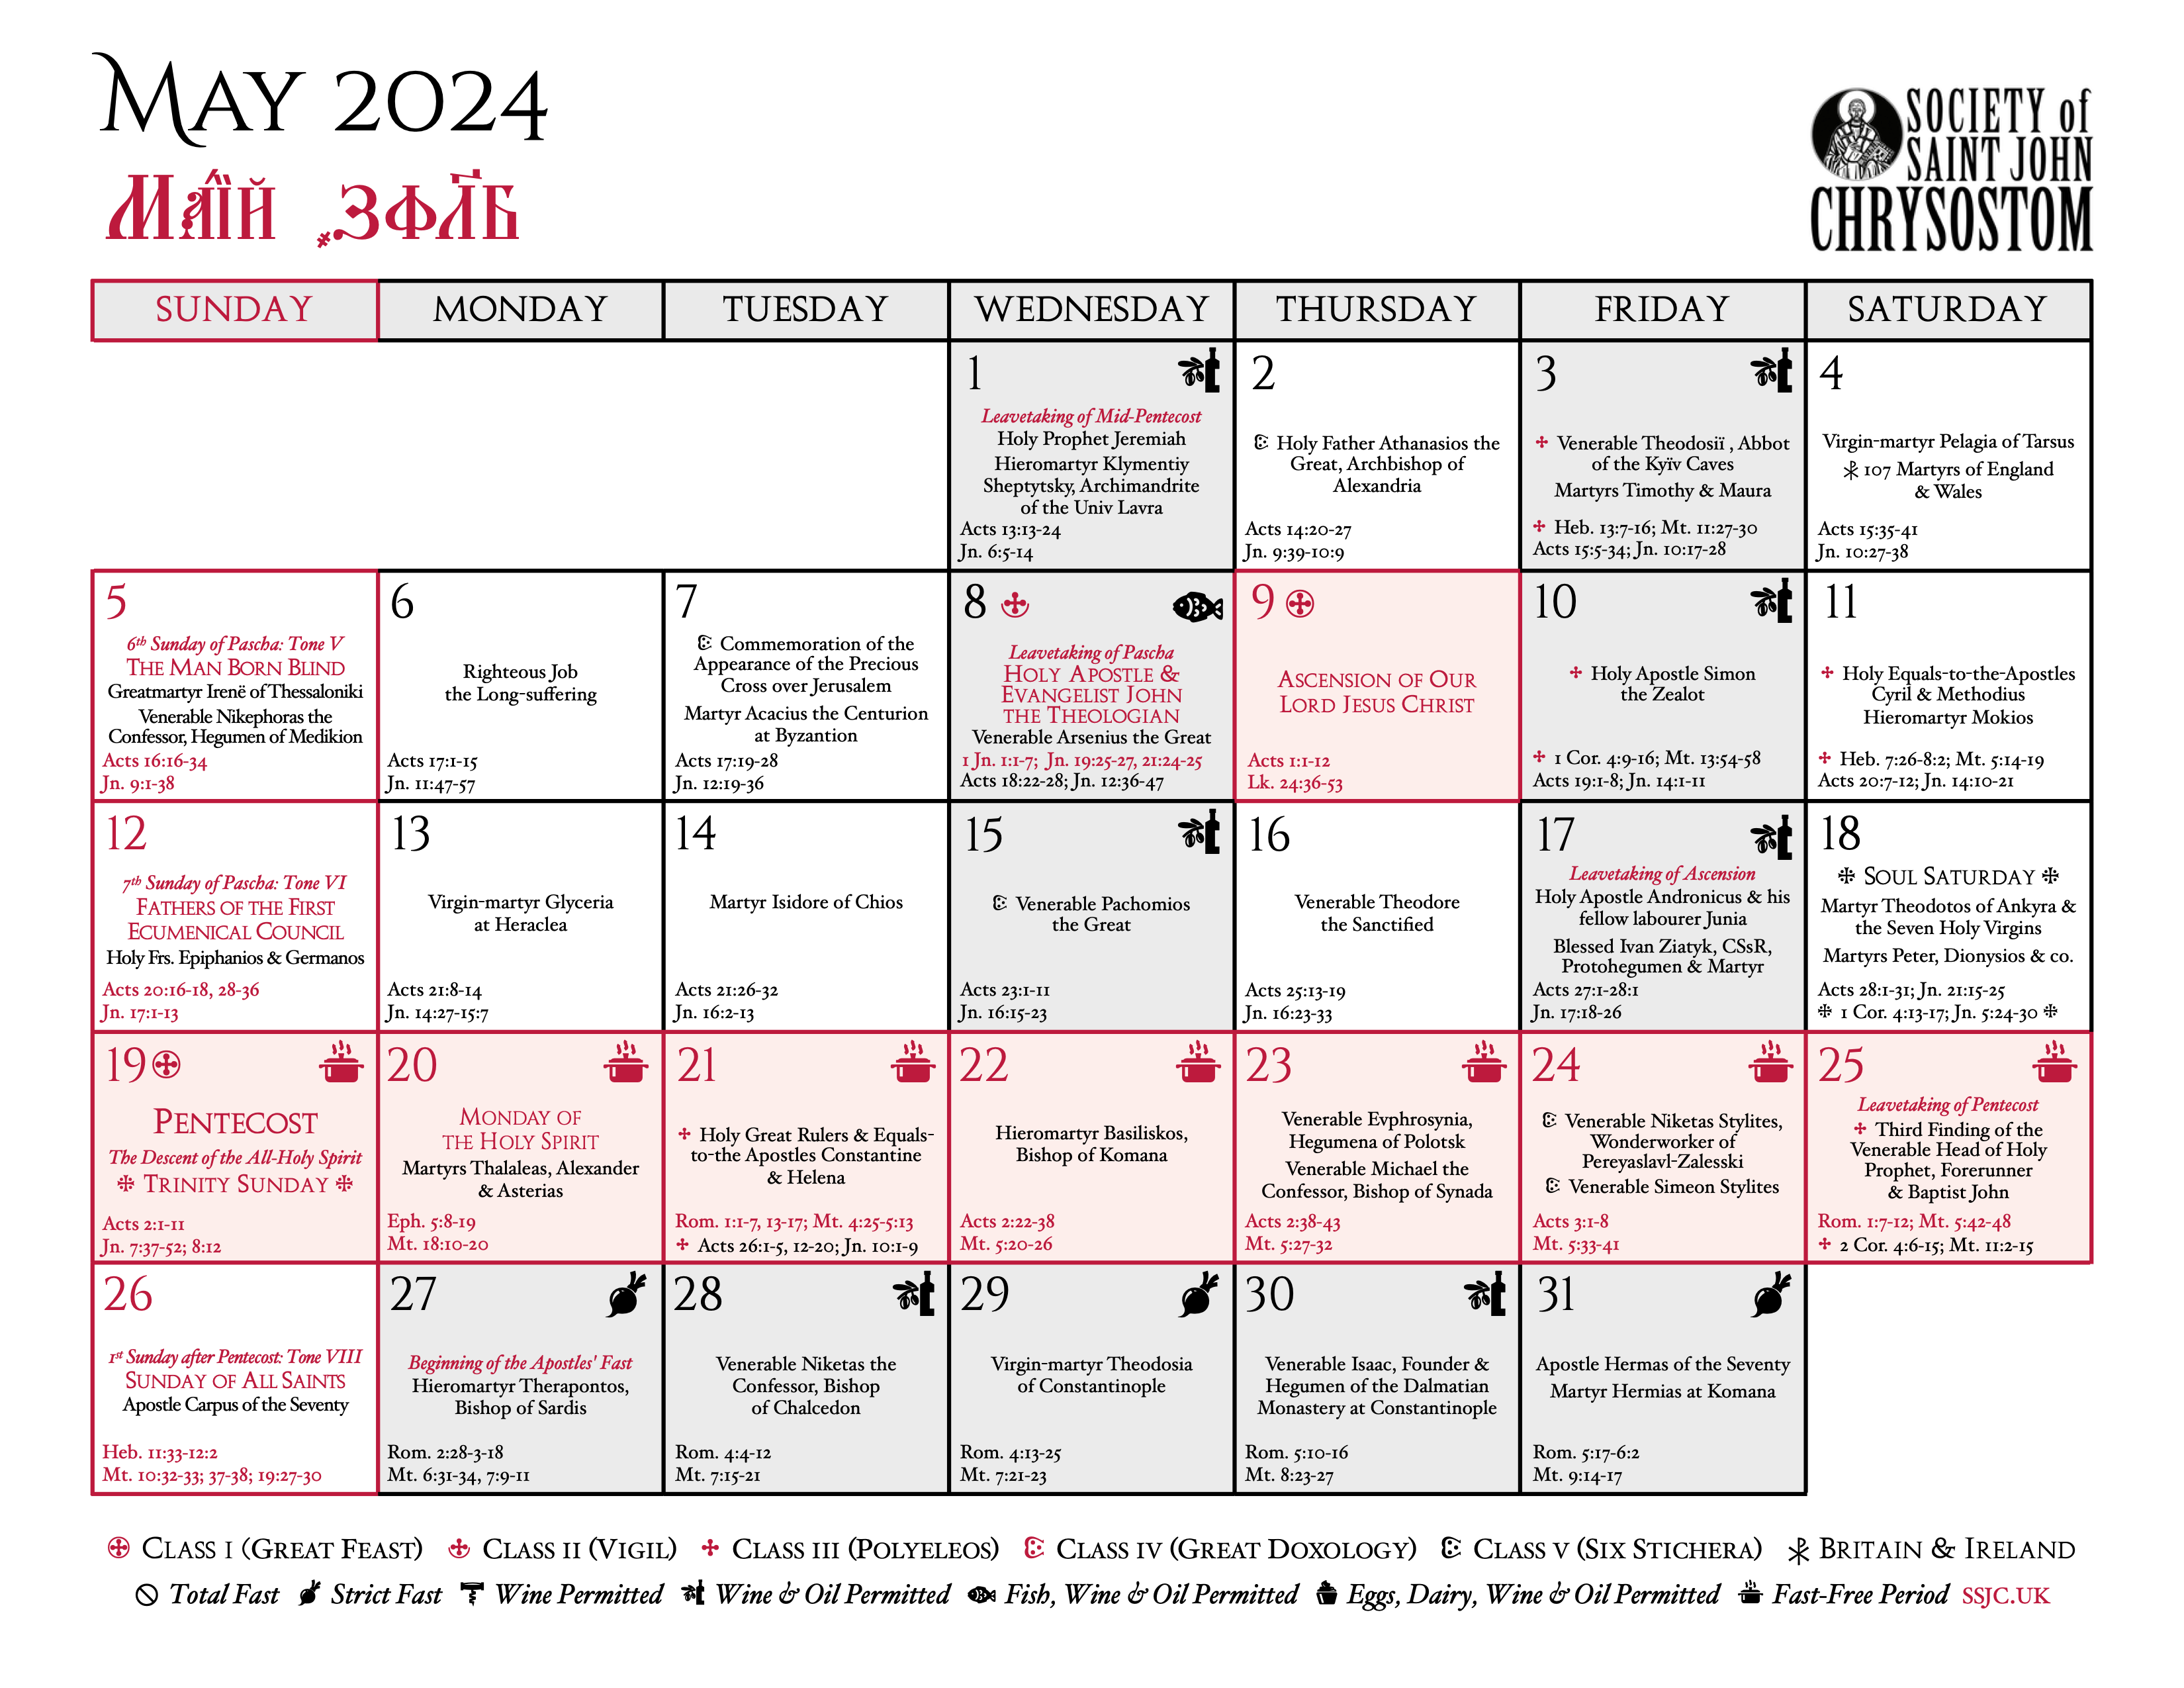 May 2024 calendar published